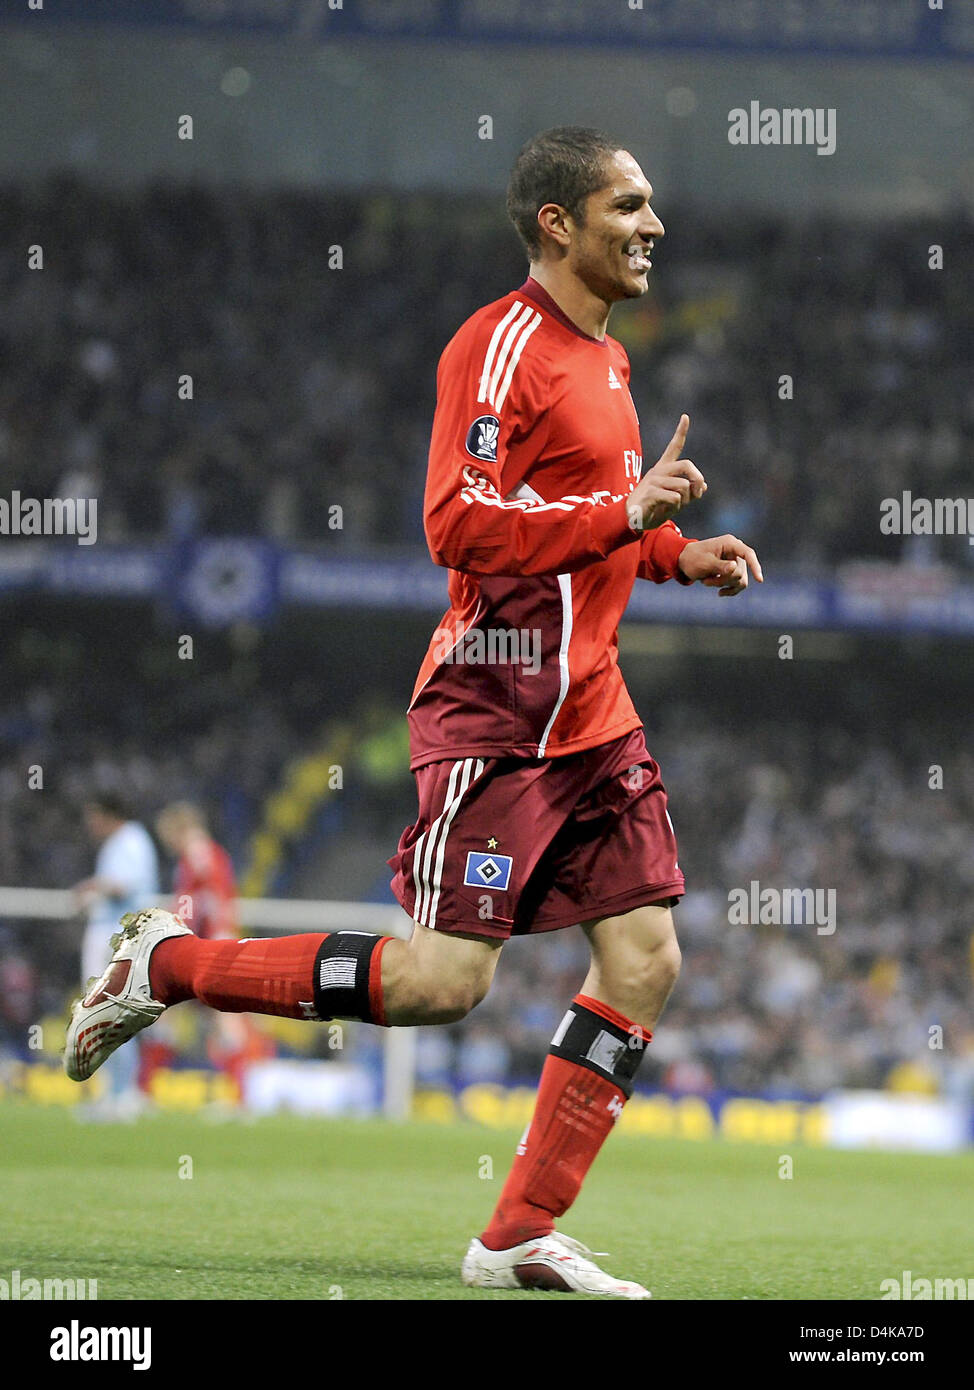 Hamburg?s Jose Paolo Guerrero cheers after his goal to 0-1 during the UEFA Cup quarter finals match Manchester City vs SV Hamburg at City of Manchester stadium in Manchester, United Kingdom, 16 April 2009. Manchester City defeated SV Hamburg 2-1. Photo: Marcus Brandt Stock Photo